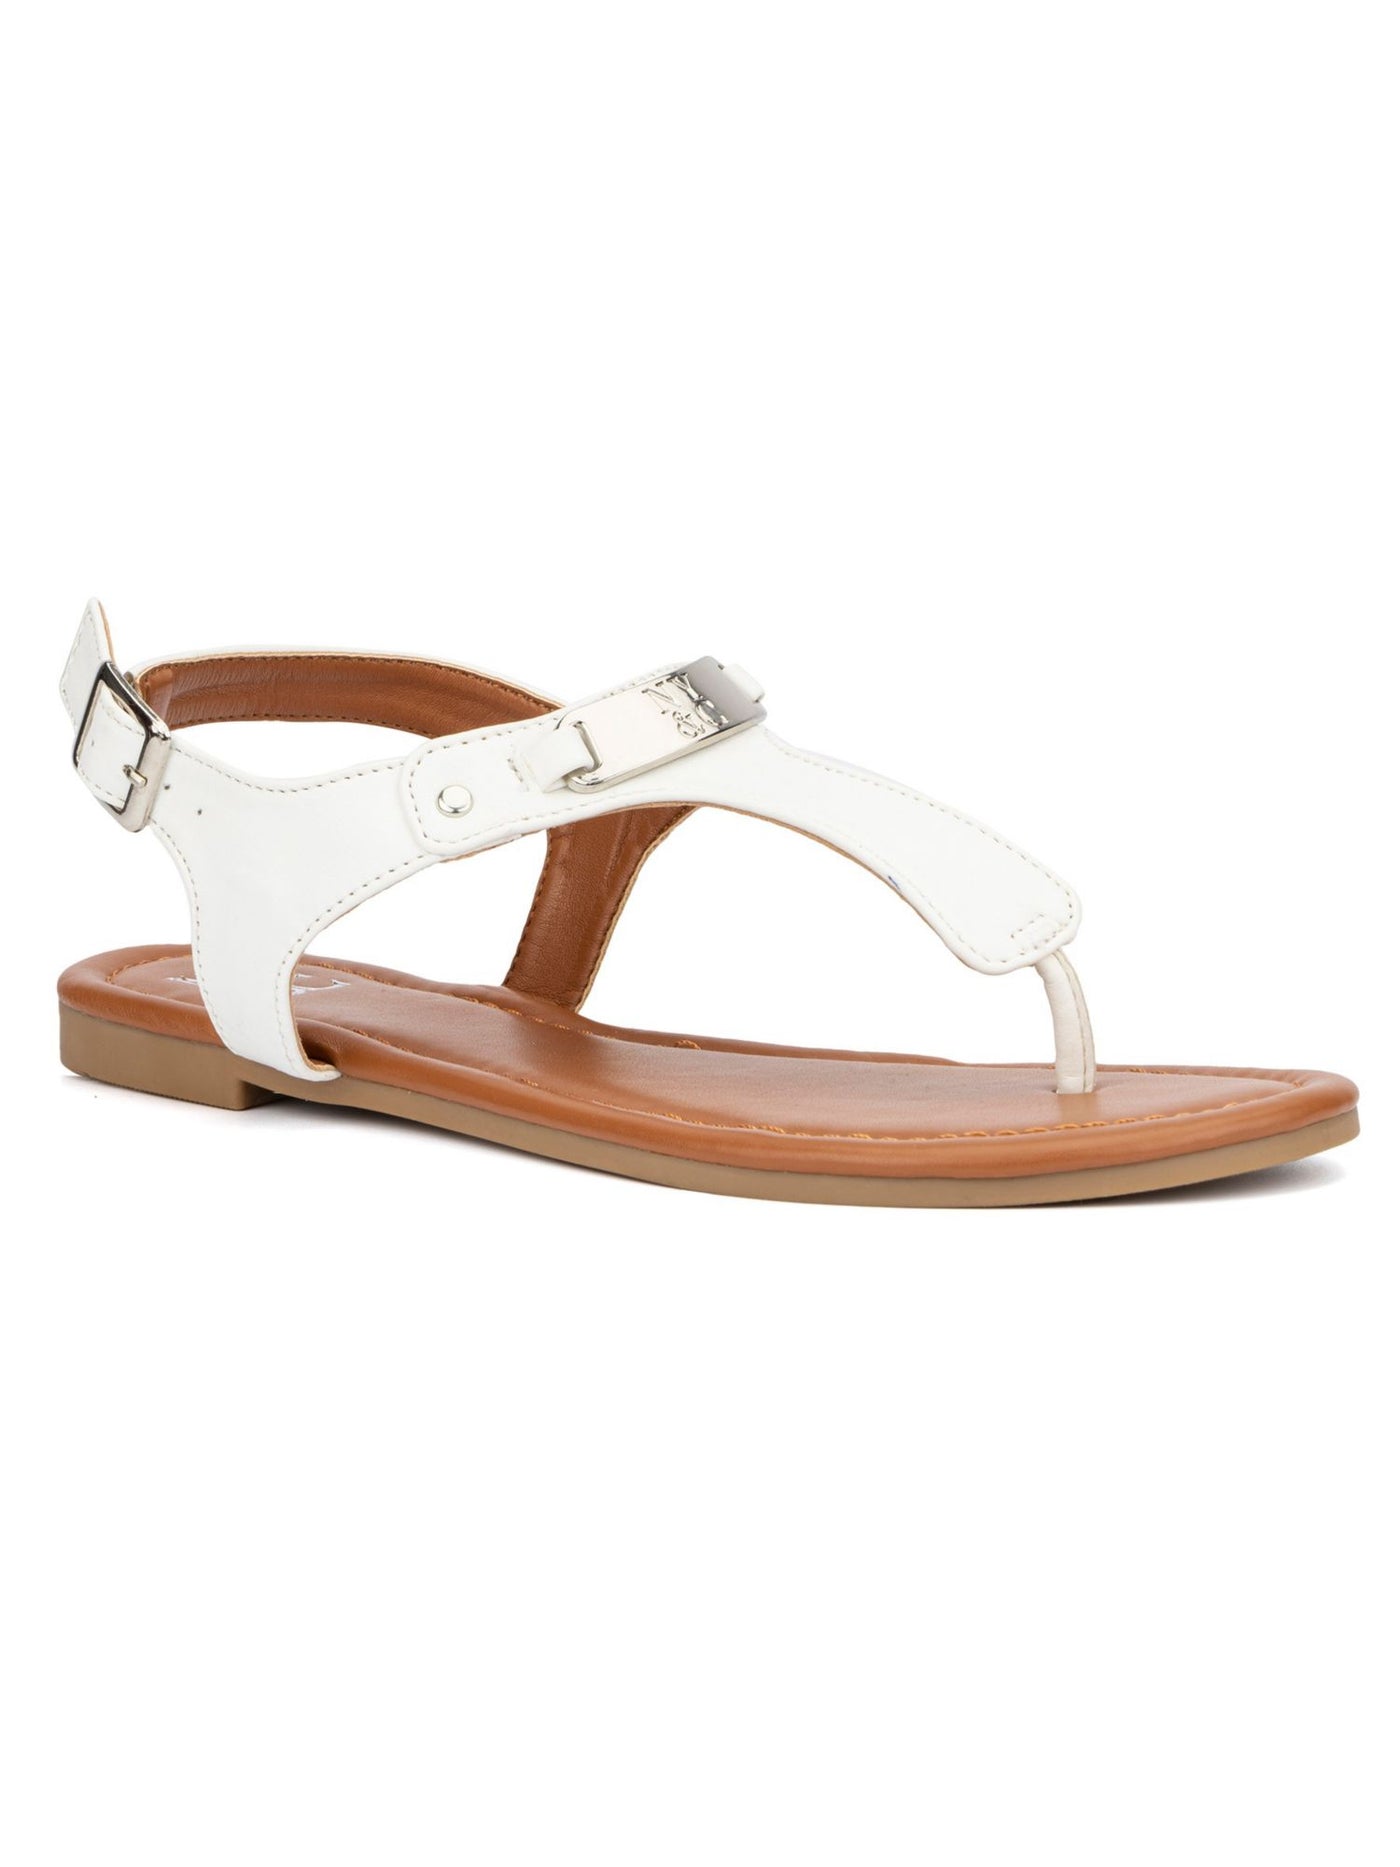 NEW YORK & CO Womens White T-Strap Padded Fiona Round Toe Buckle Thong Sandals Shoes 6.5